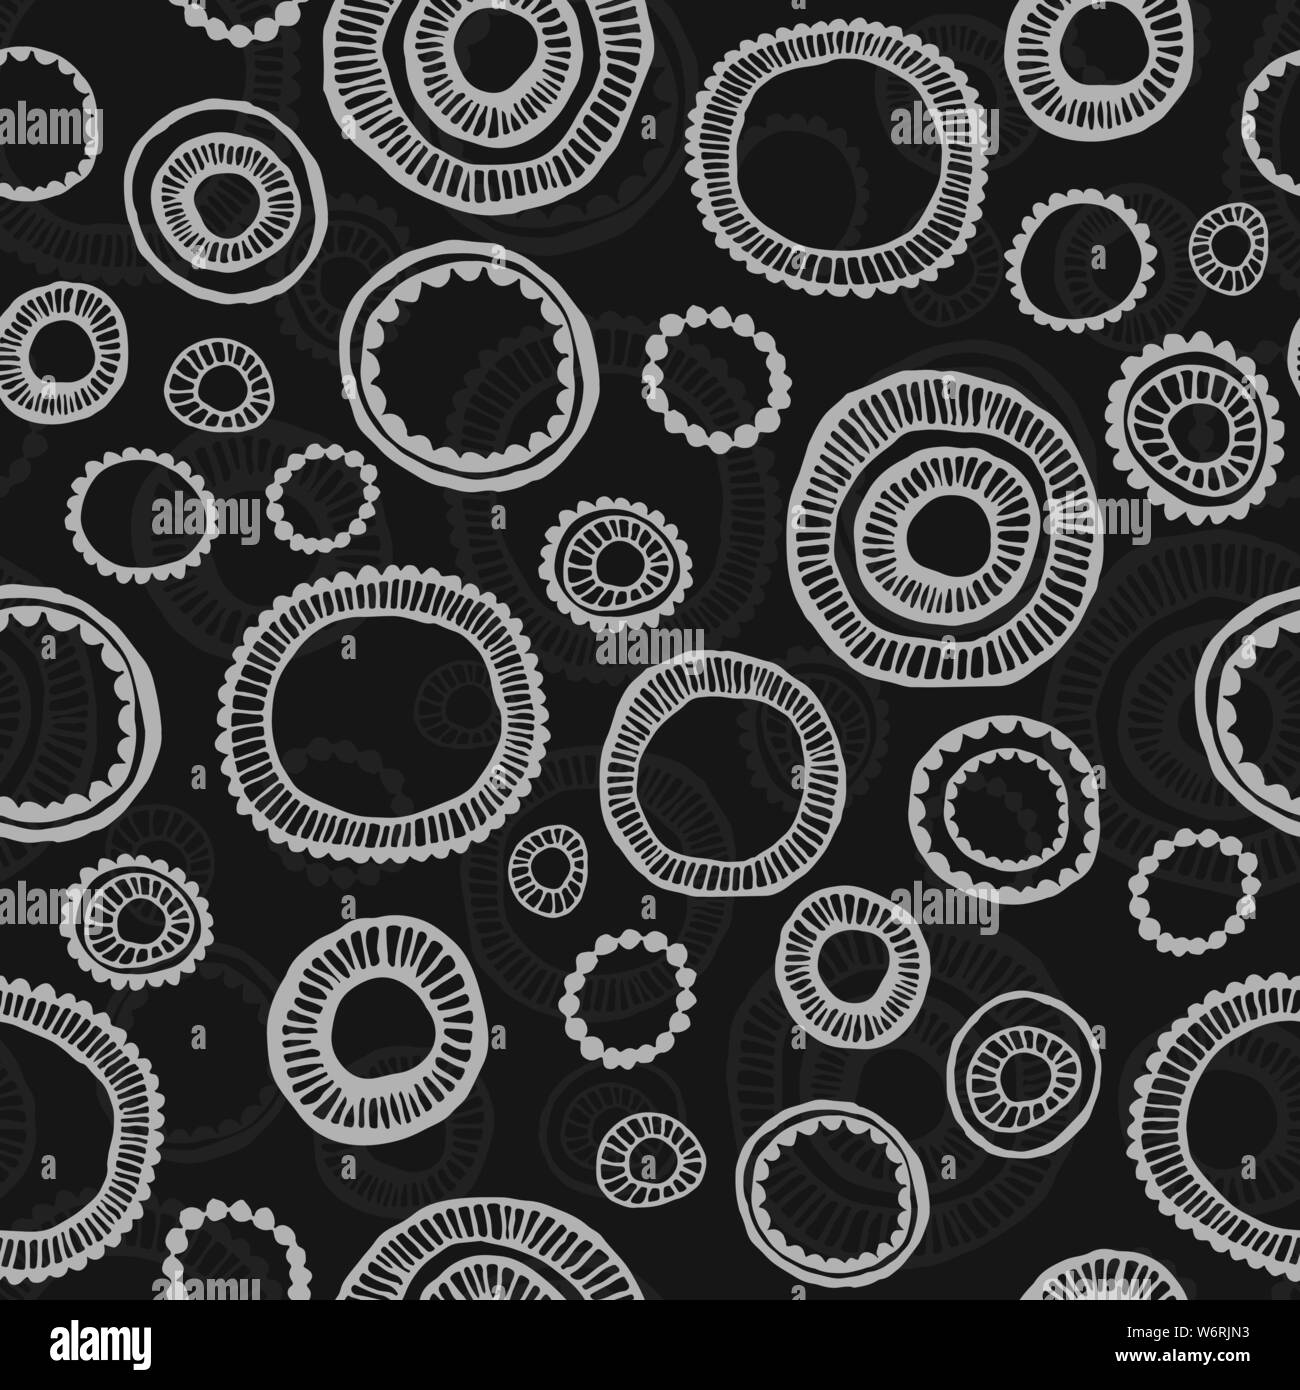 Seamless hand drawn pattern with circles. Vector illustration Stock Vector